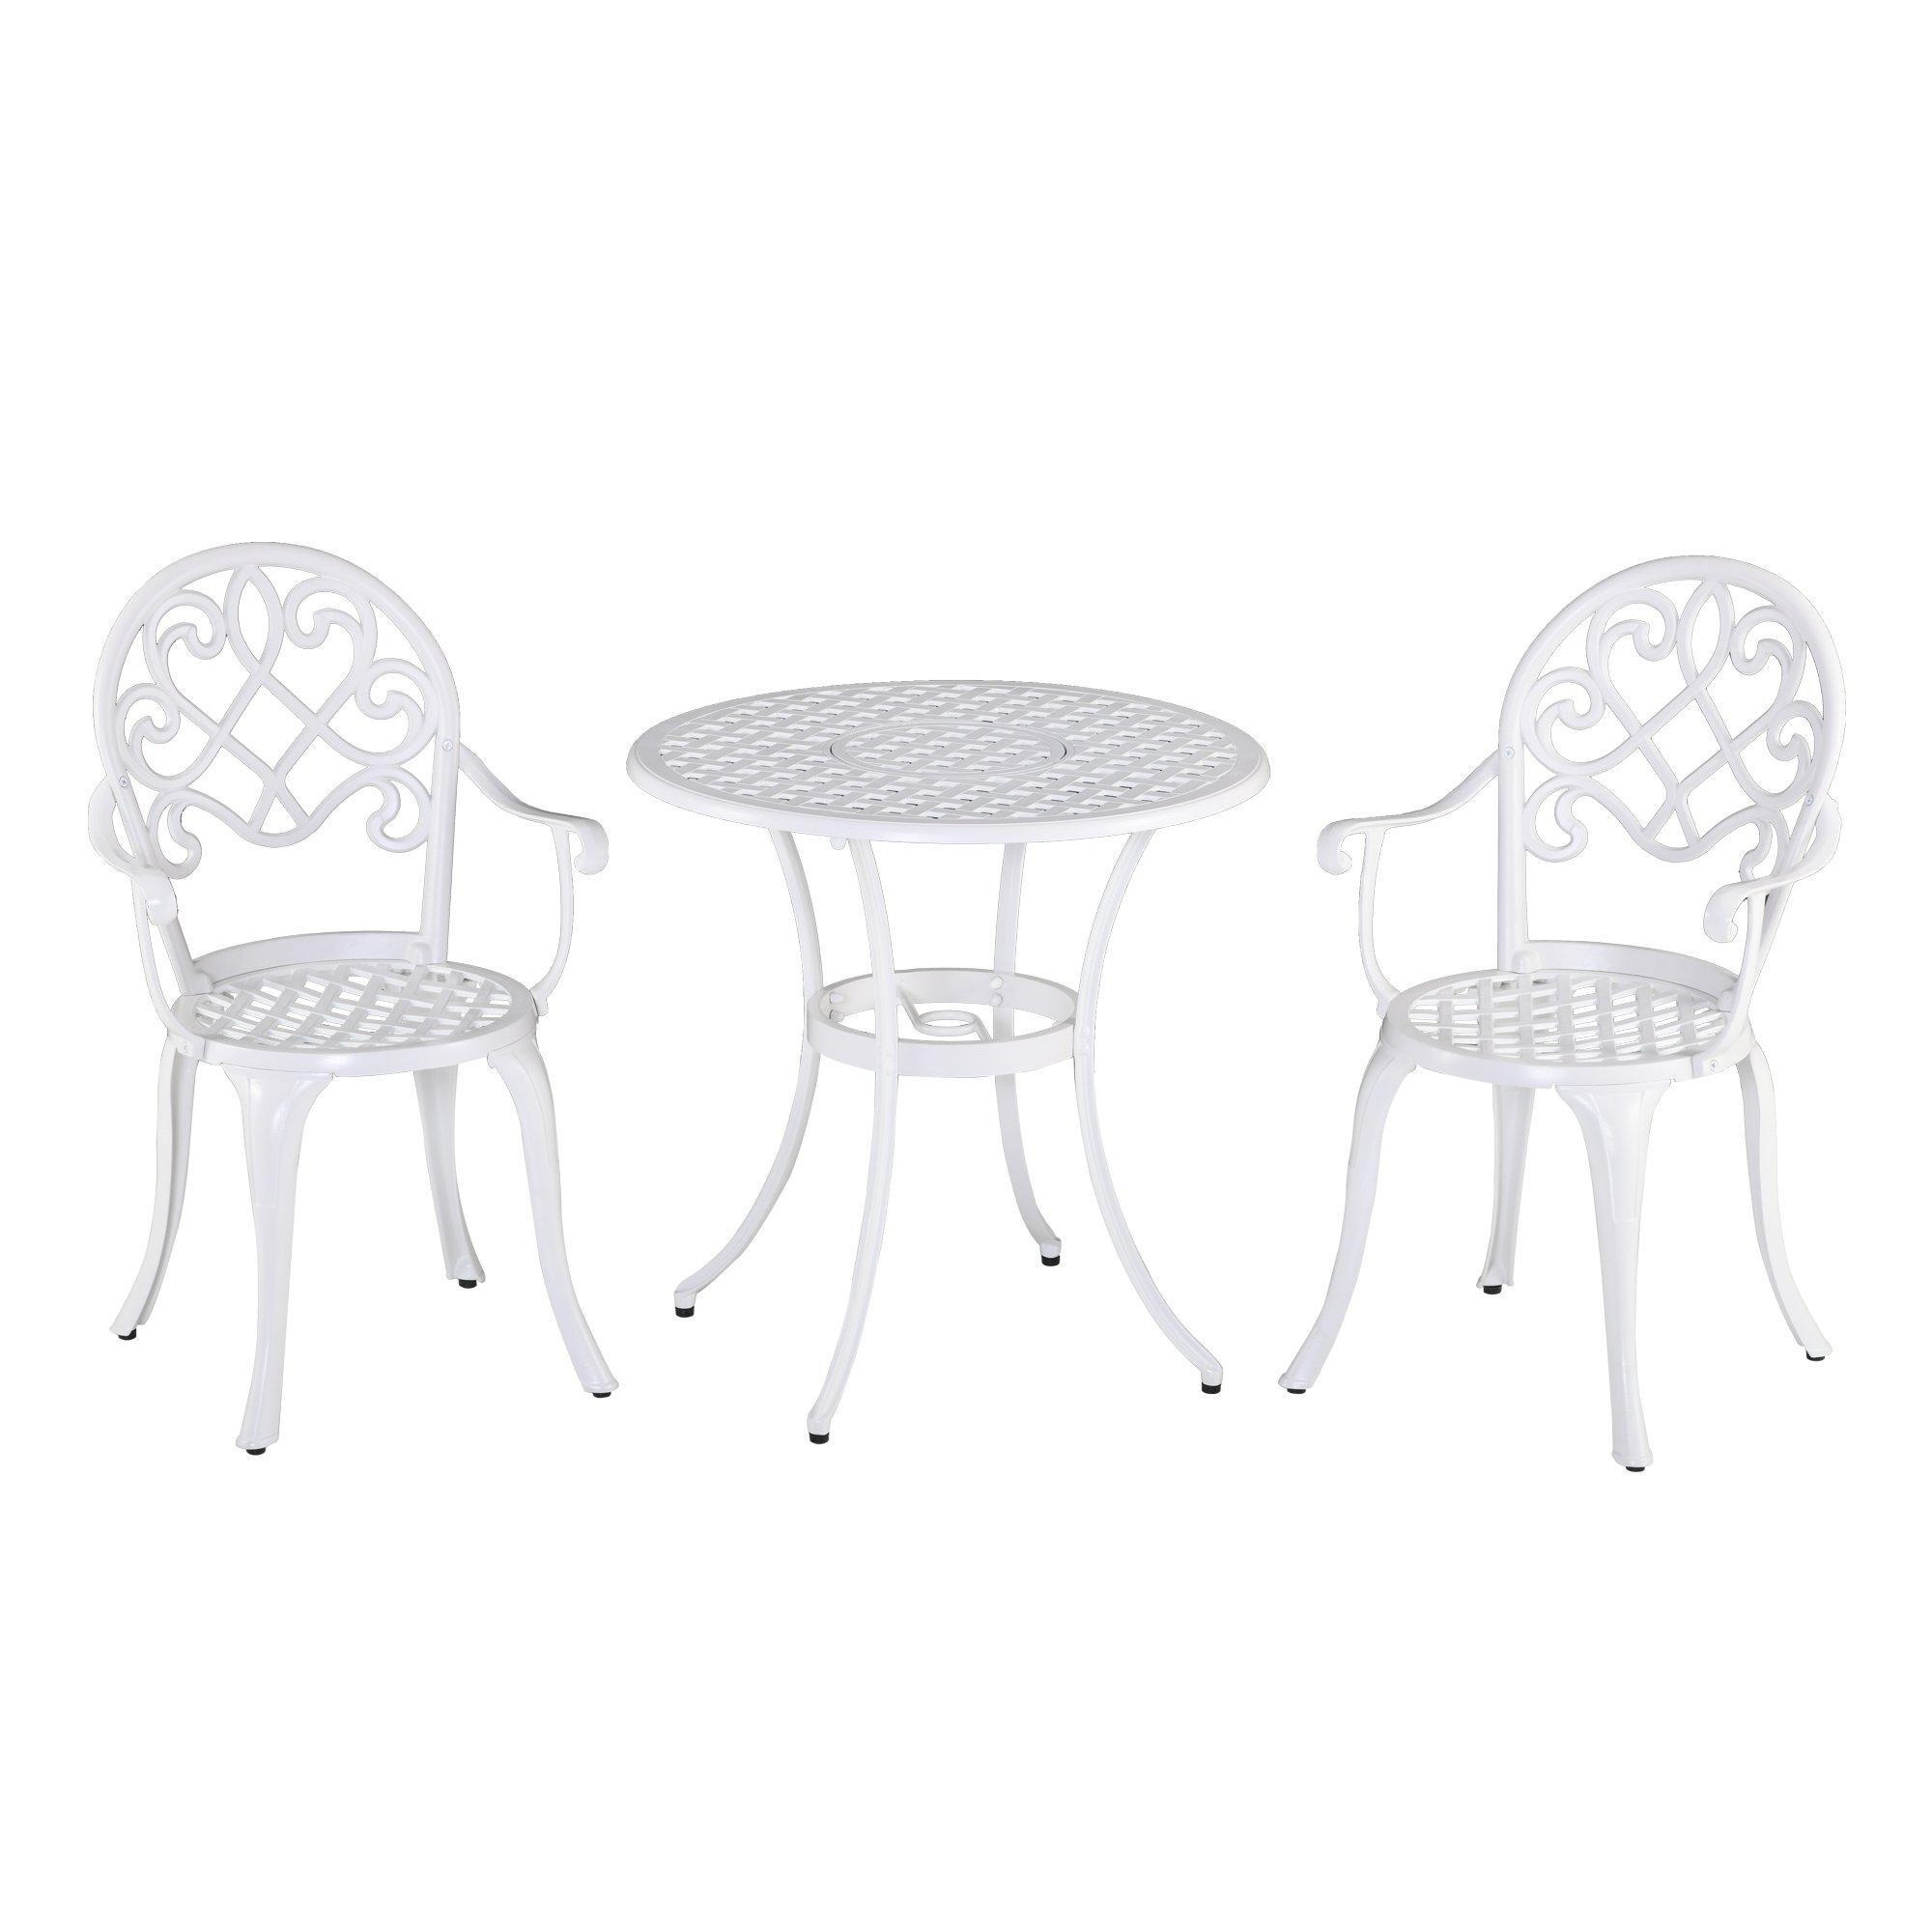 3PCs Garden Bistro Set Cast Aluminium Round Table with 2 Chairs - image 1